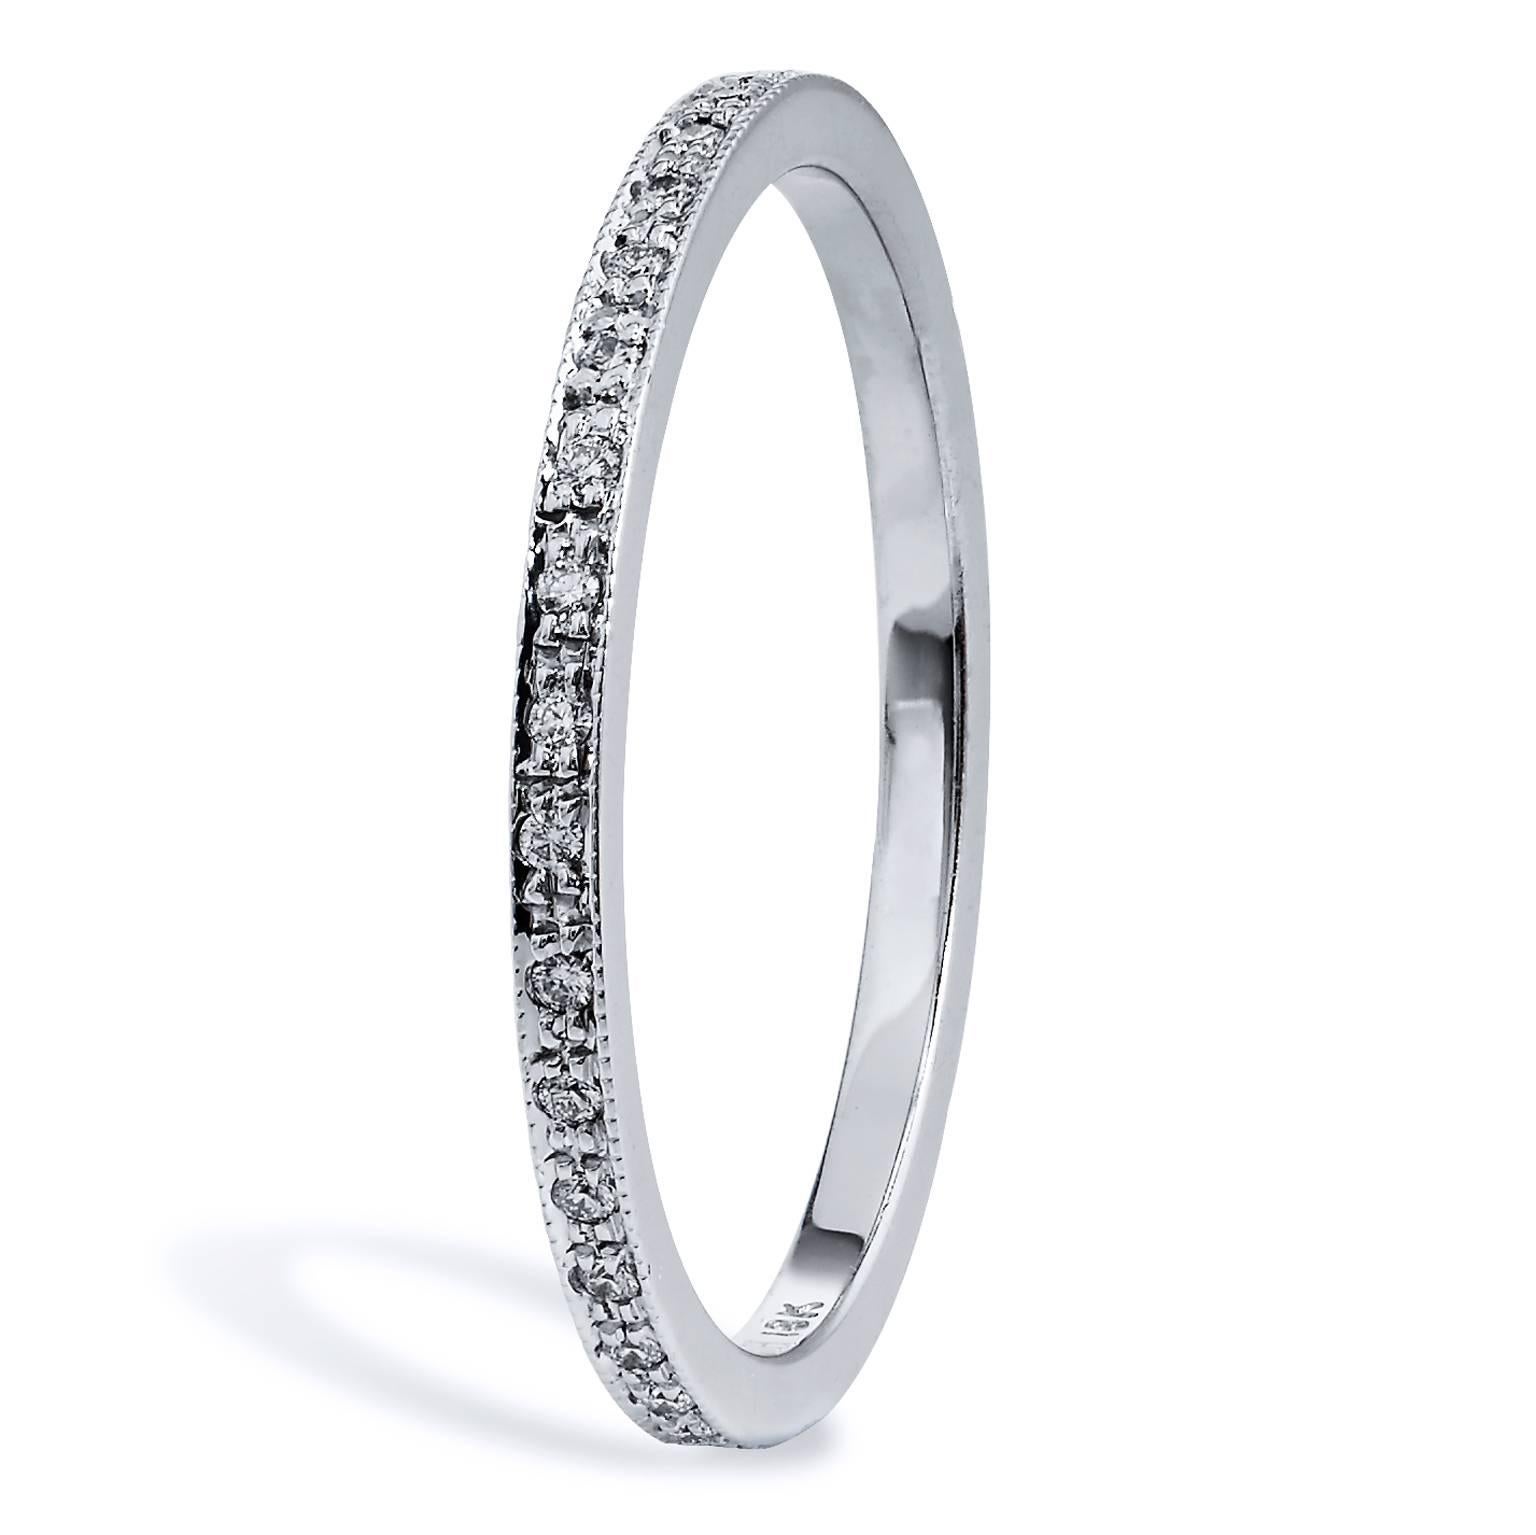 This band ring features 0.12 carat of Round cut diamonds (F/VS) pave set. Affixed to an 18 karat white gold band with milgrain work, this ring provides a mosaic of light and color that twinkles with remarkable beauty.